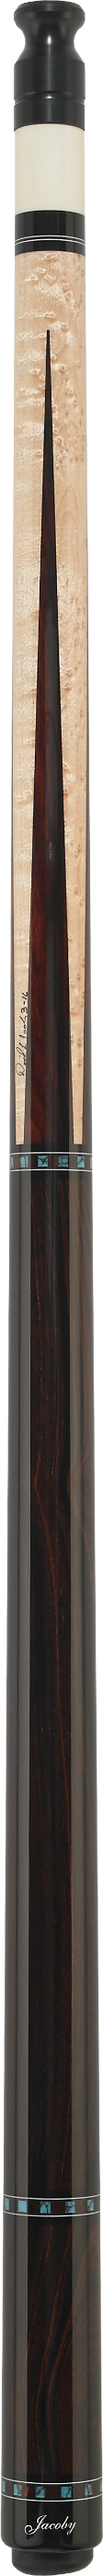 Jacoby JCB02 Pool Cue -Jacoby